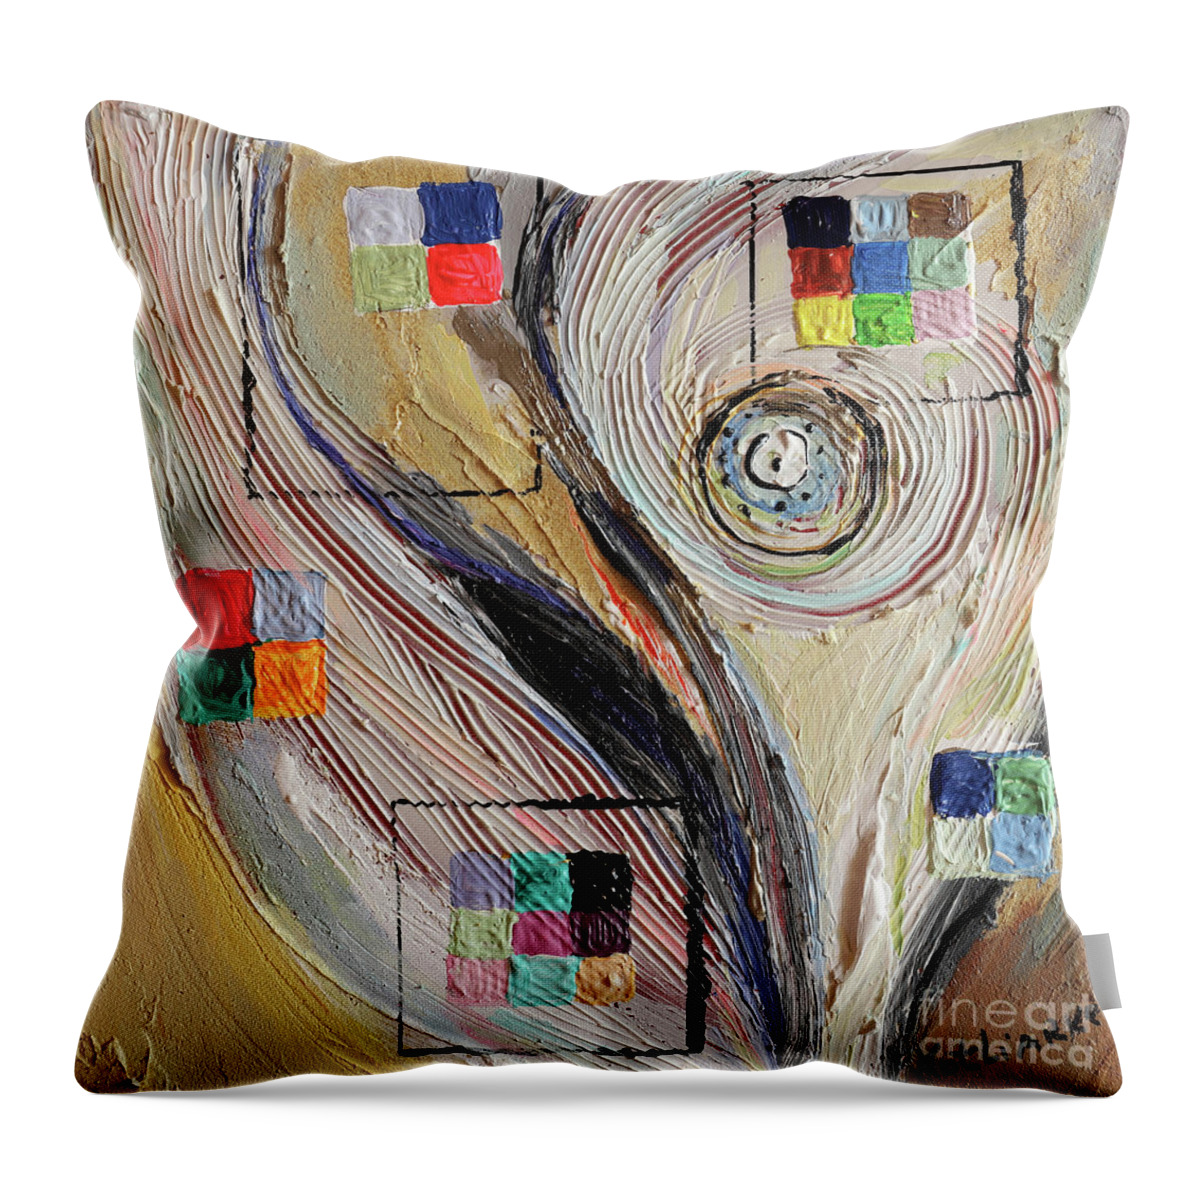 Geometric Art Throw Pillow featuring the painting Pixelization #5 by Elena Kotliarker